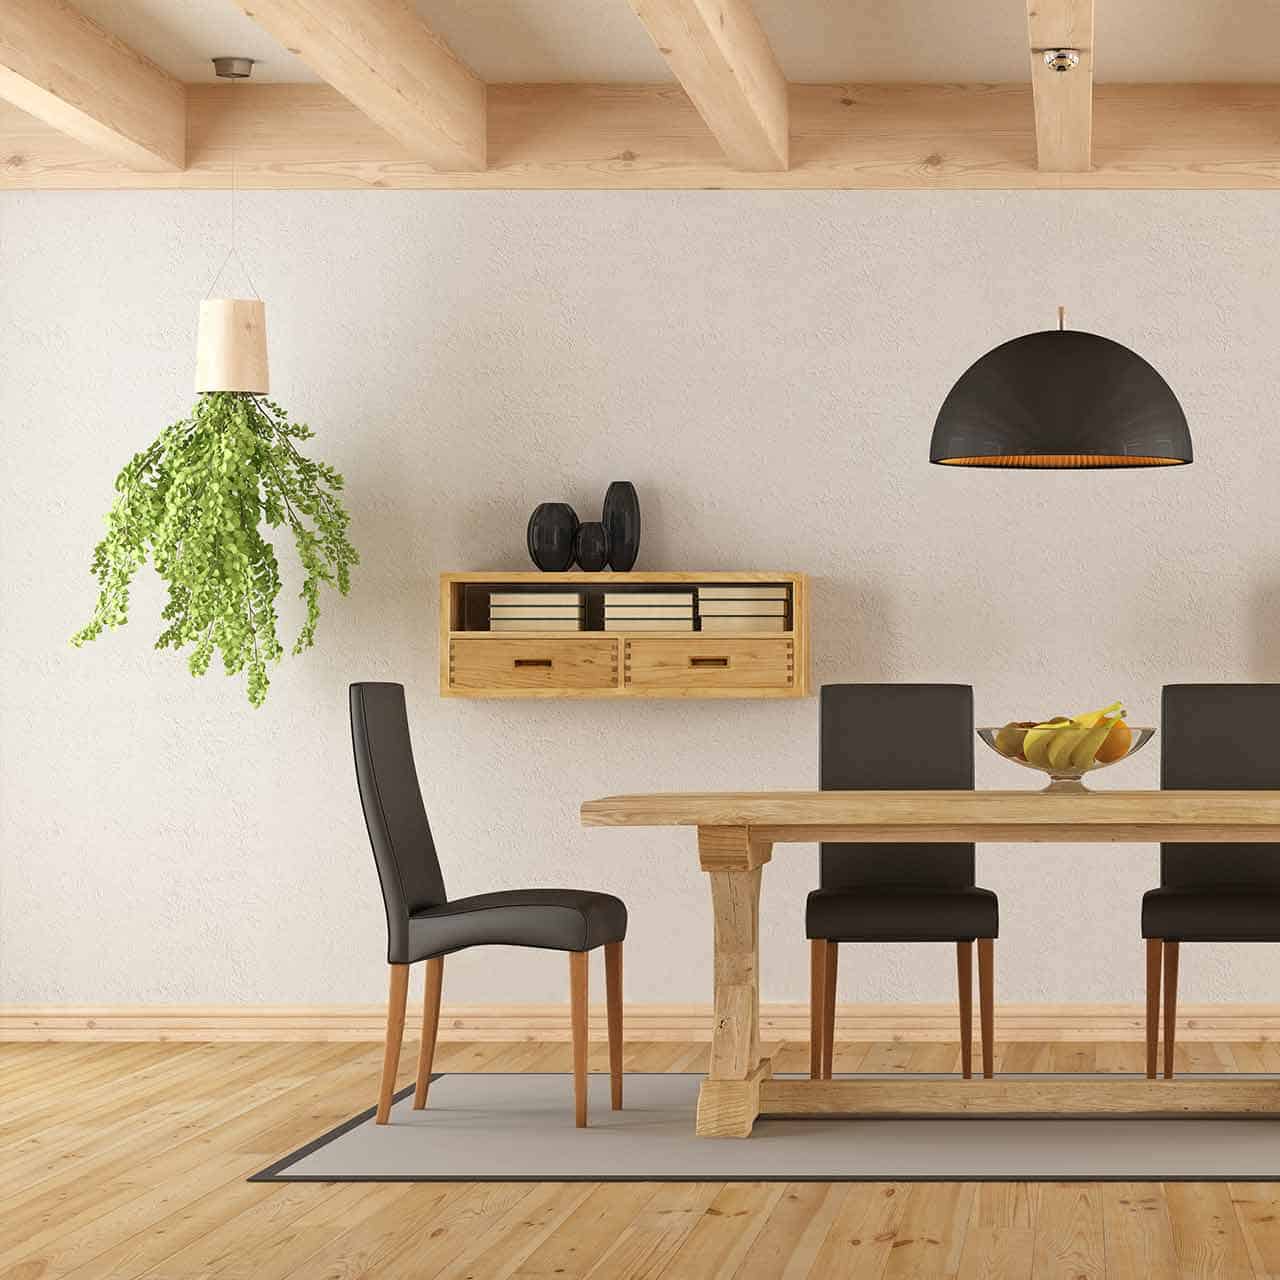 Rustic style dining room to give your dining room a rustic look, the tableware you choose is crucial for dining room style